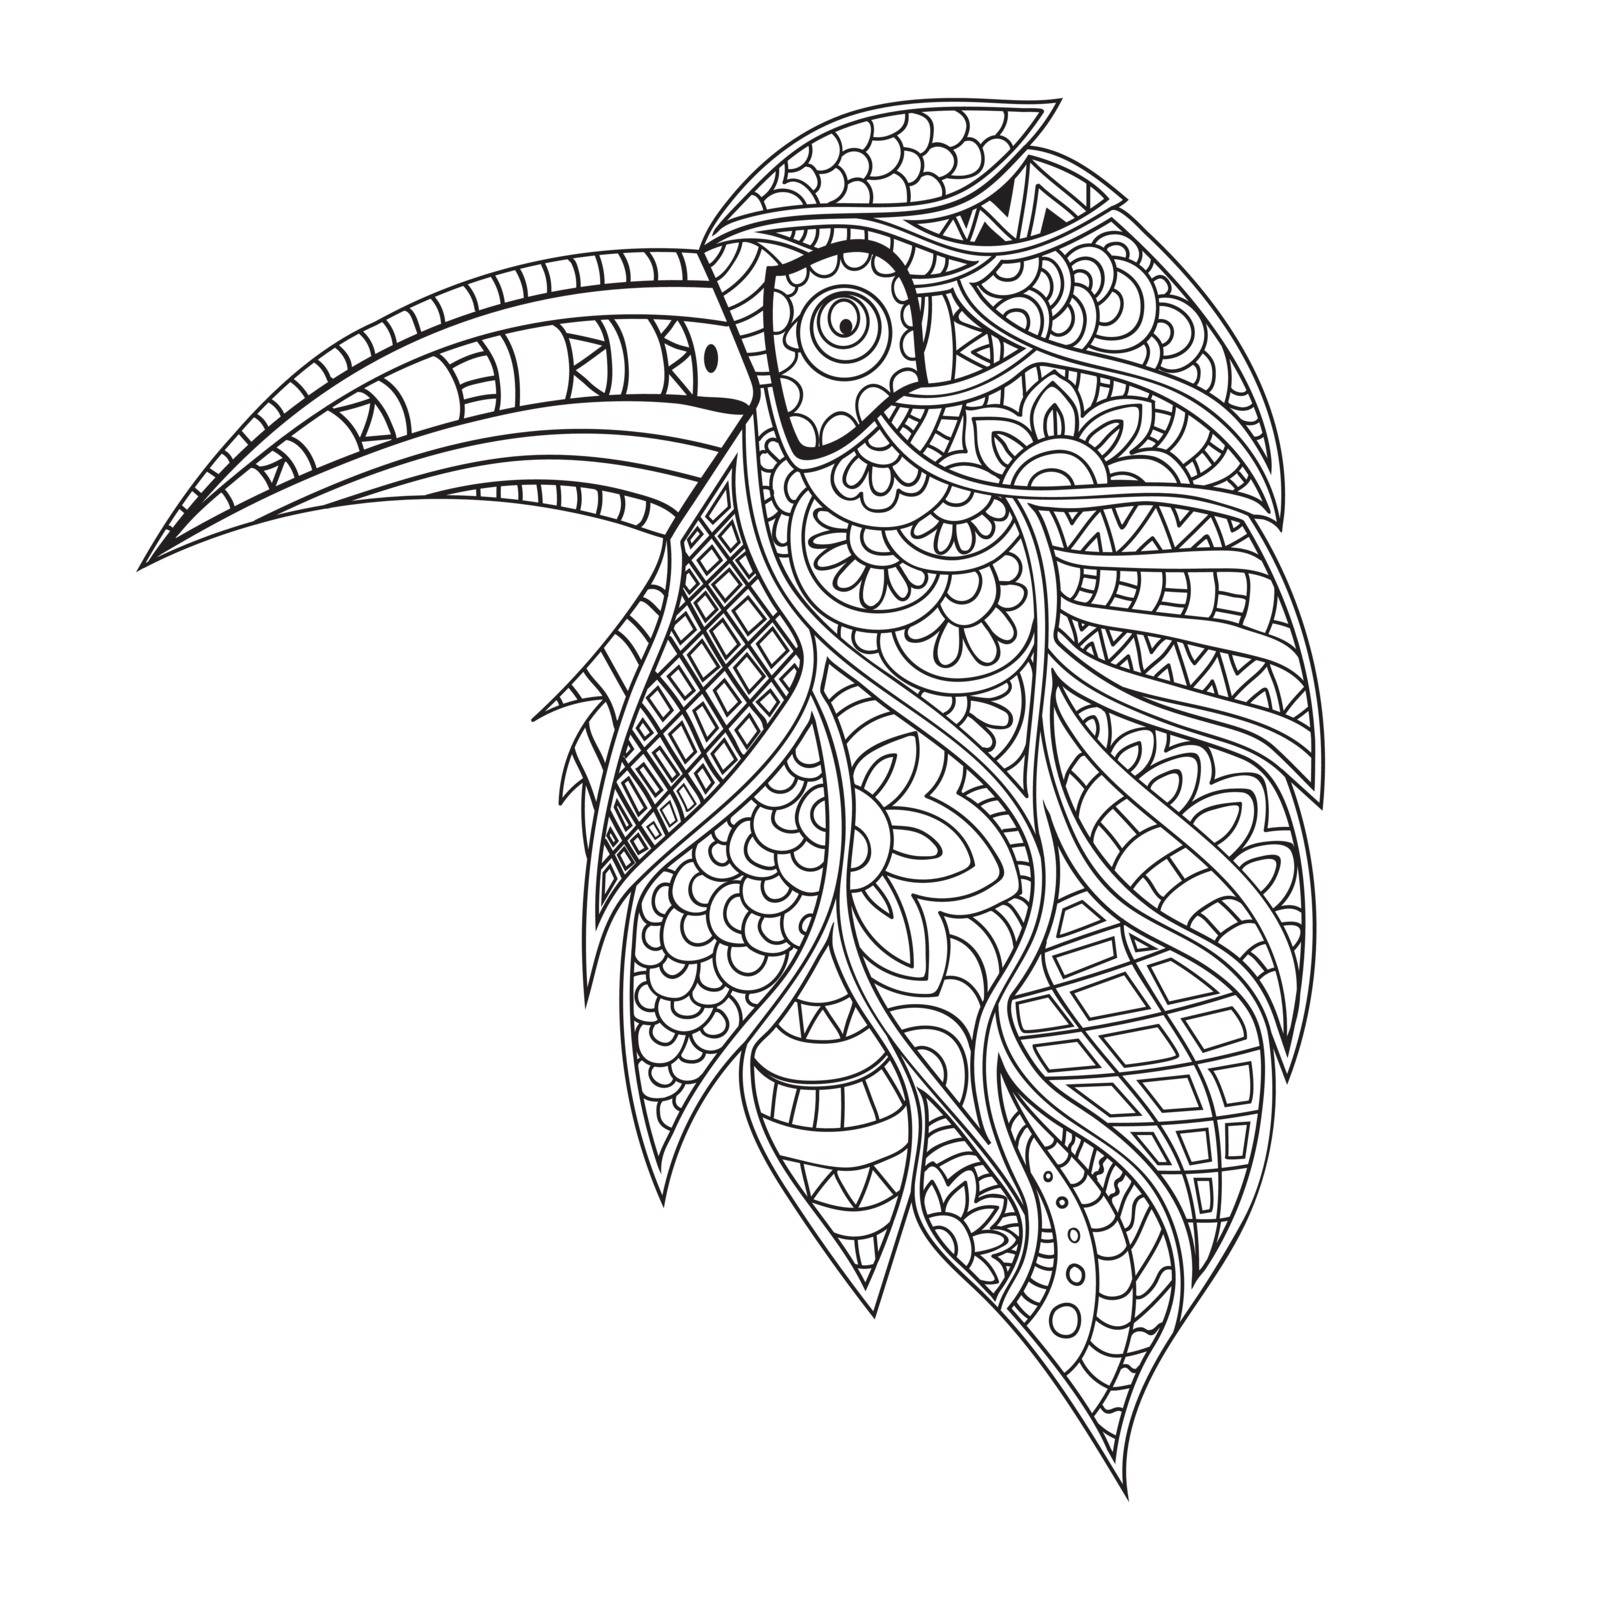 Ethnic floral patterned Hornbill Bird in hand drawn doodle style. Creative illustration for adult anti stress coloring book.